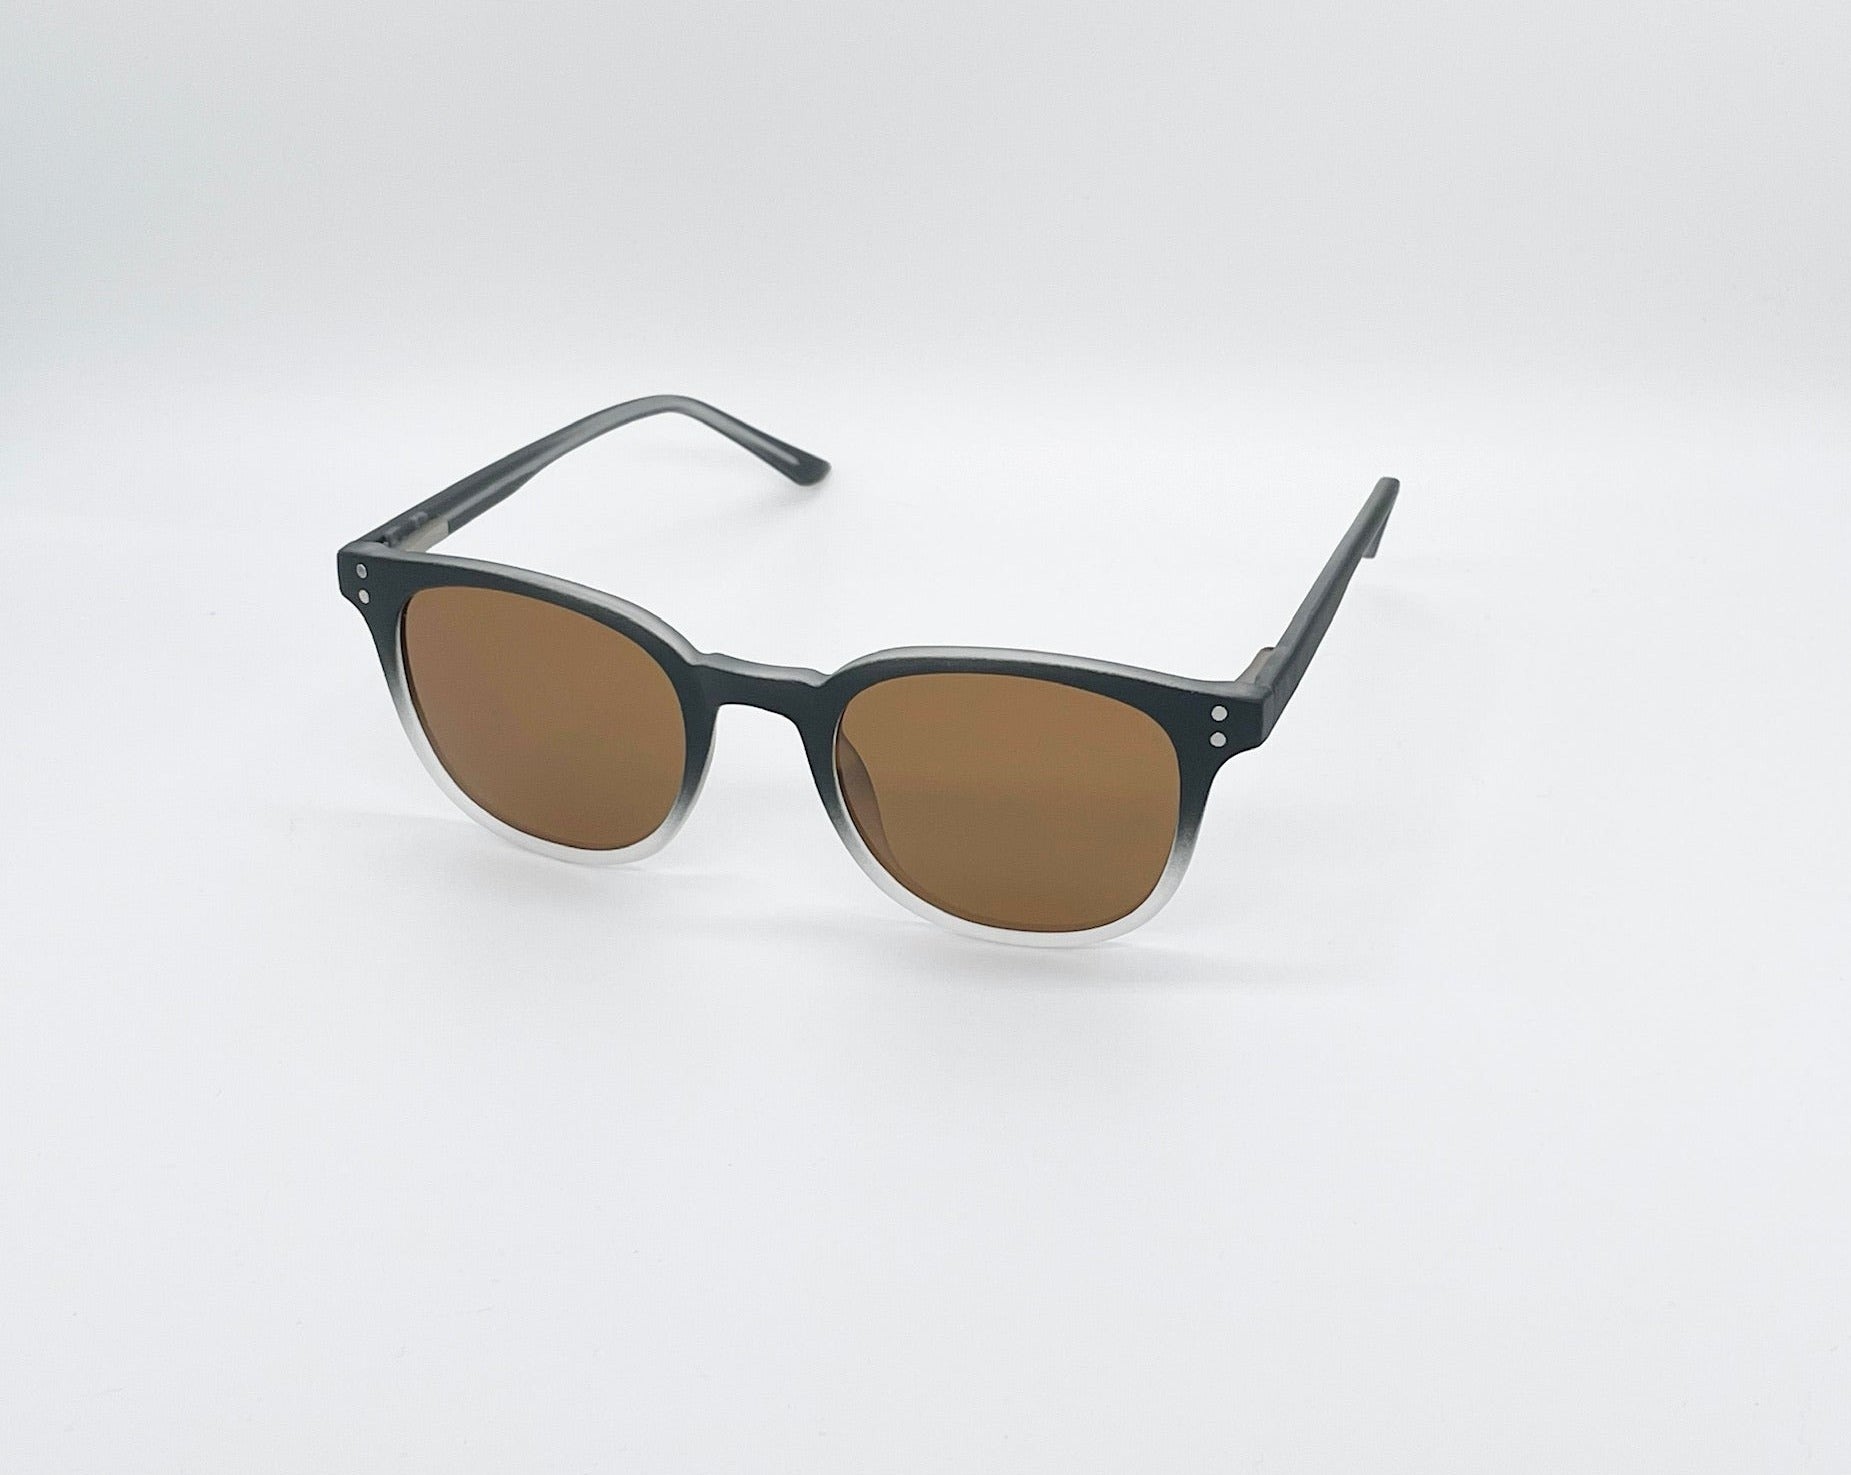 Grab The Leash And Let's Go - SPEX Eyewear Inc.